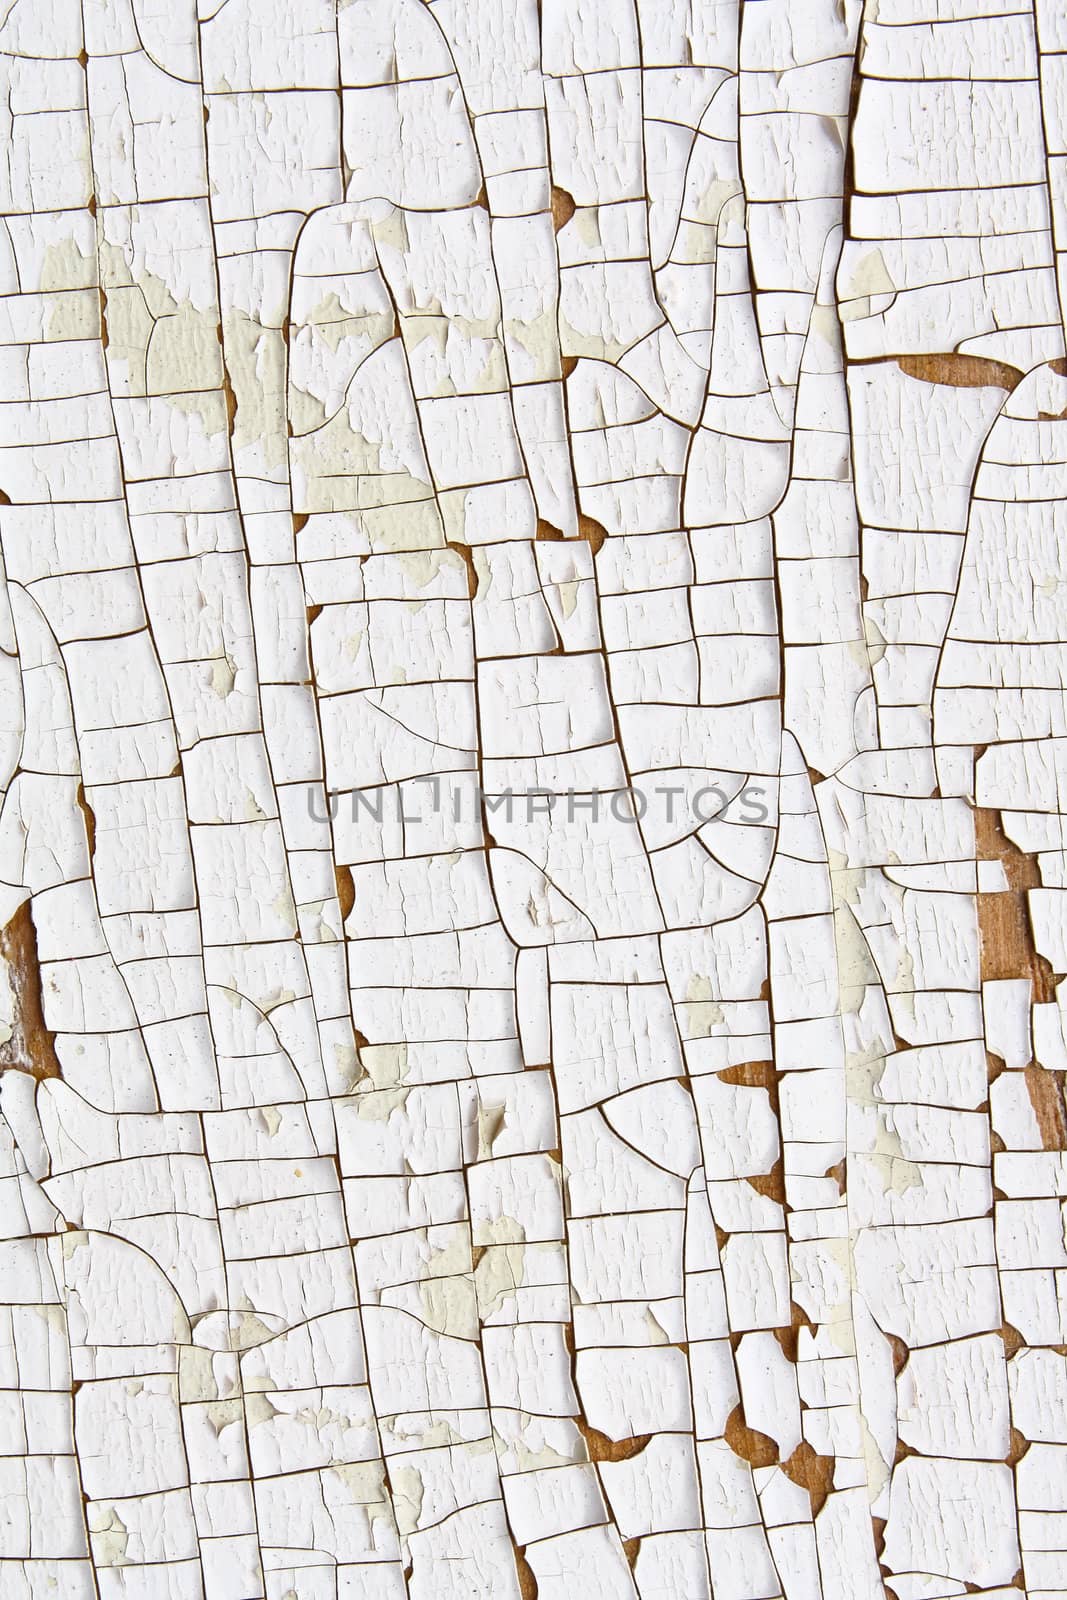 Cracked and Peeling White Paint 2 by Em3